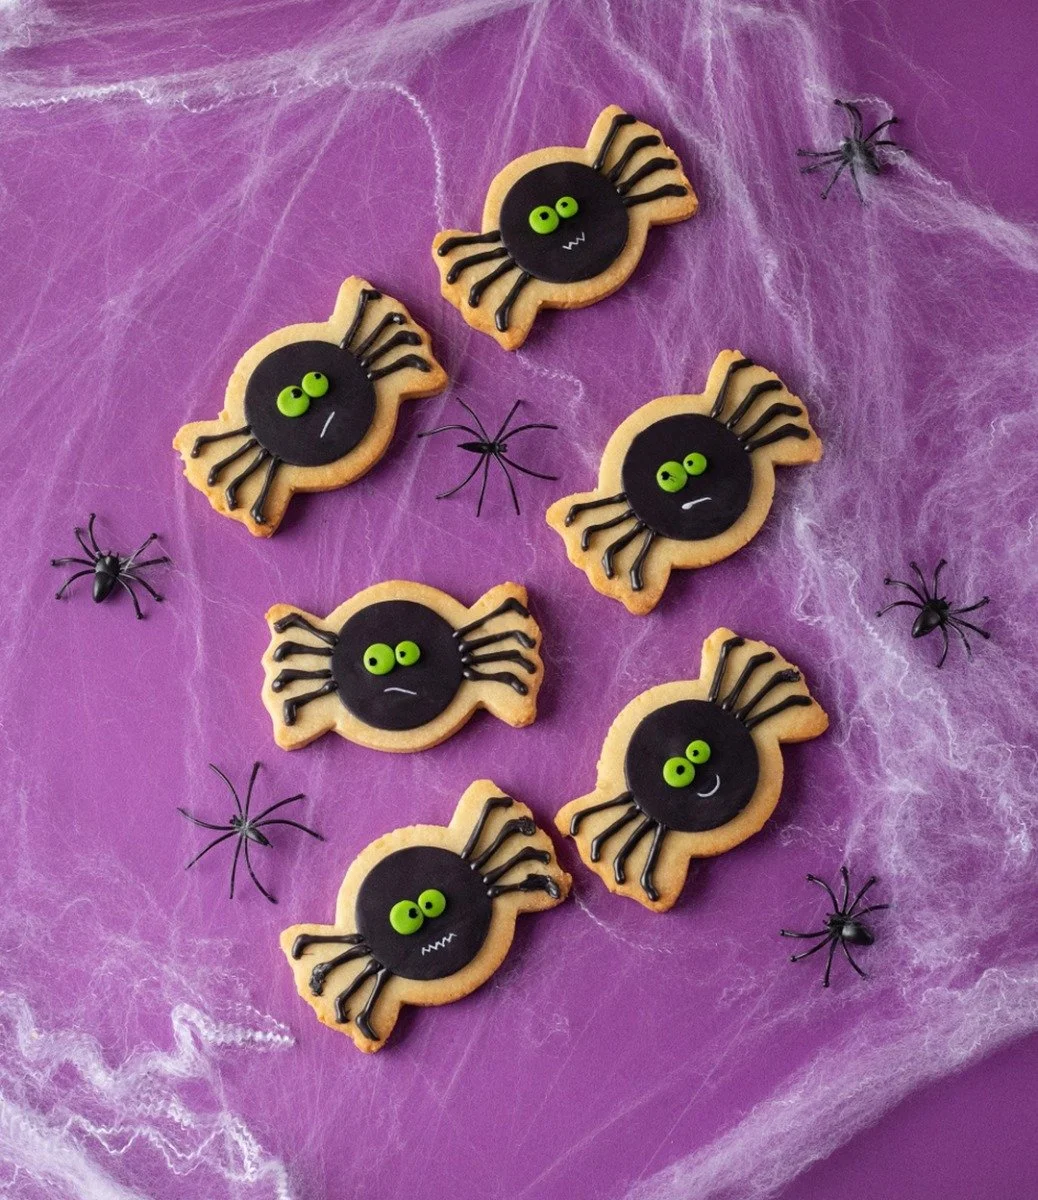 Spider Cookies by Cake Social